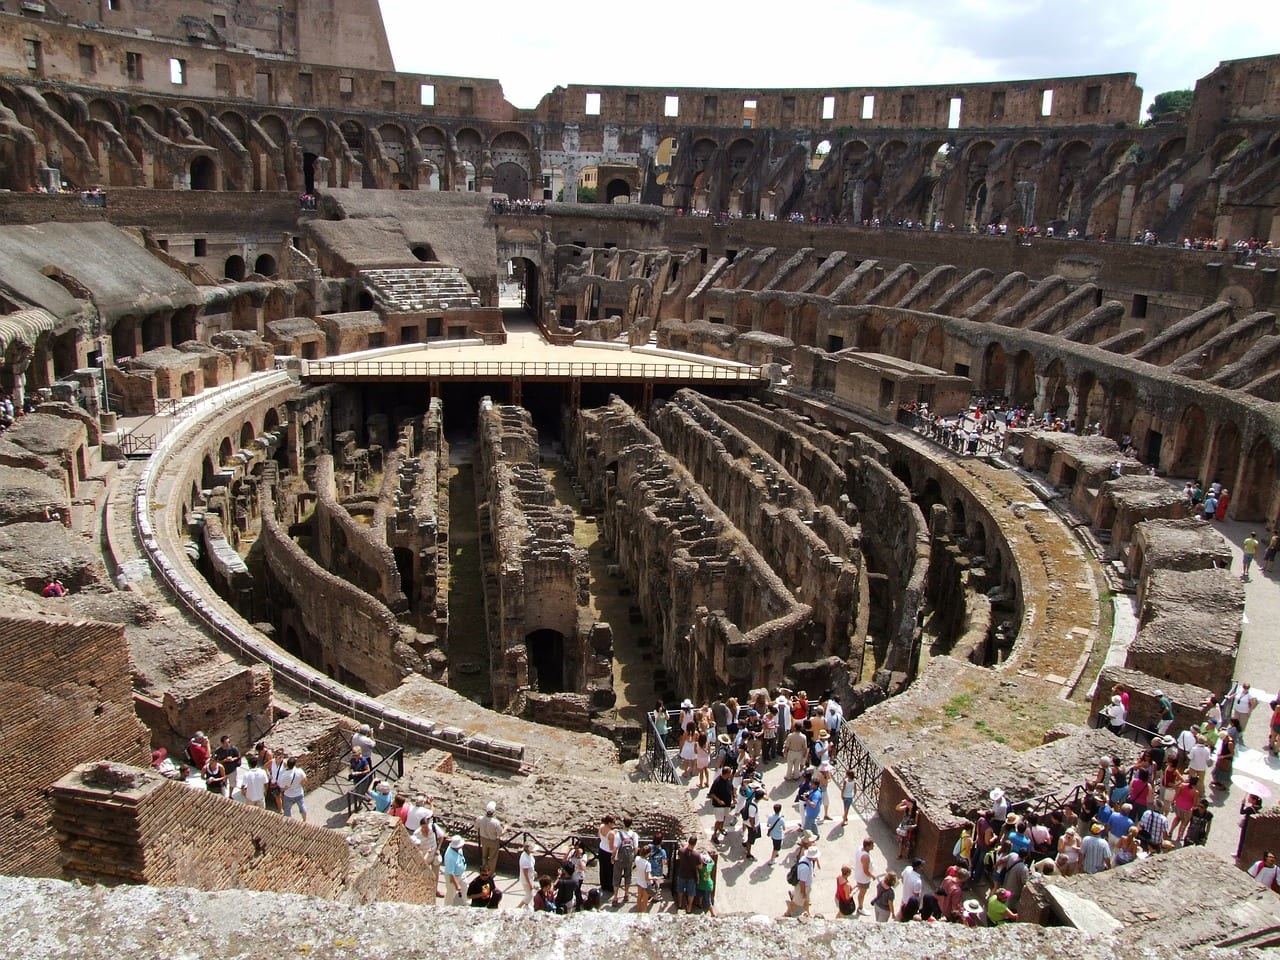 Inside the Colosseum in Rome